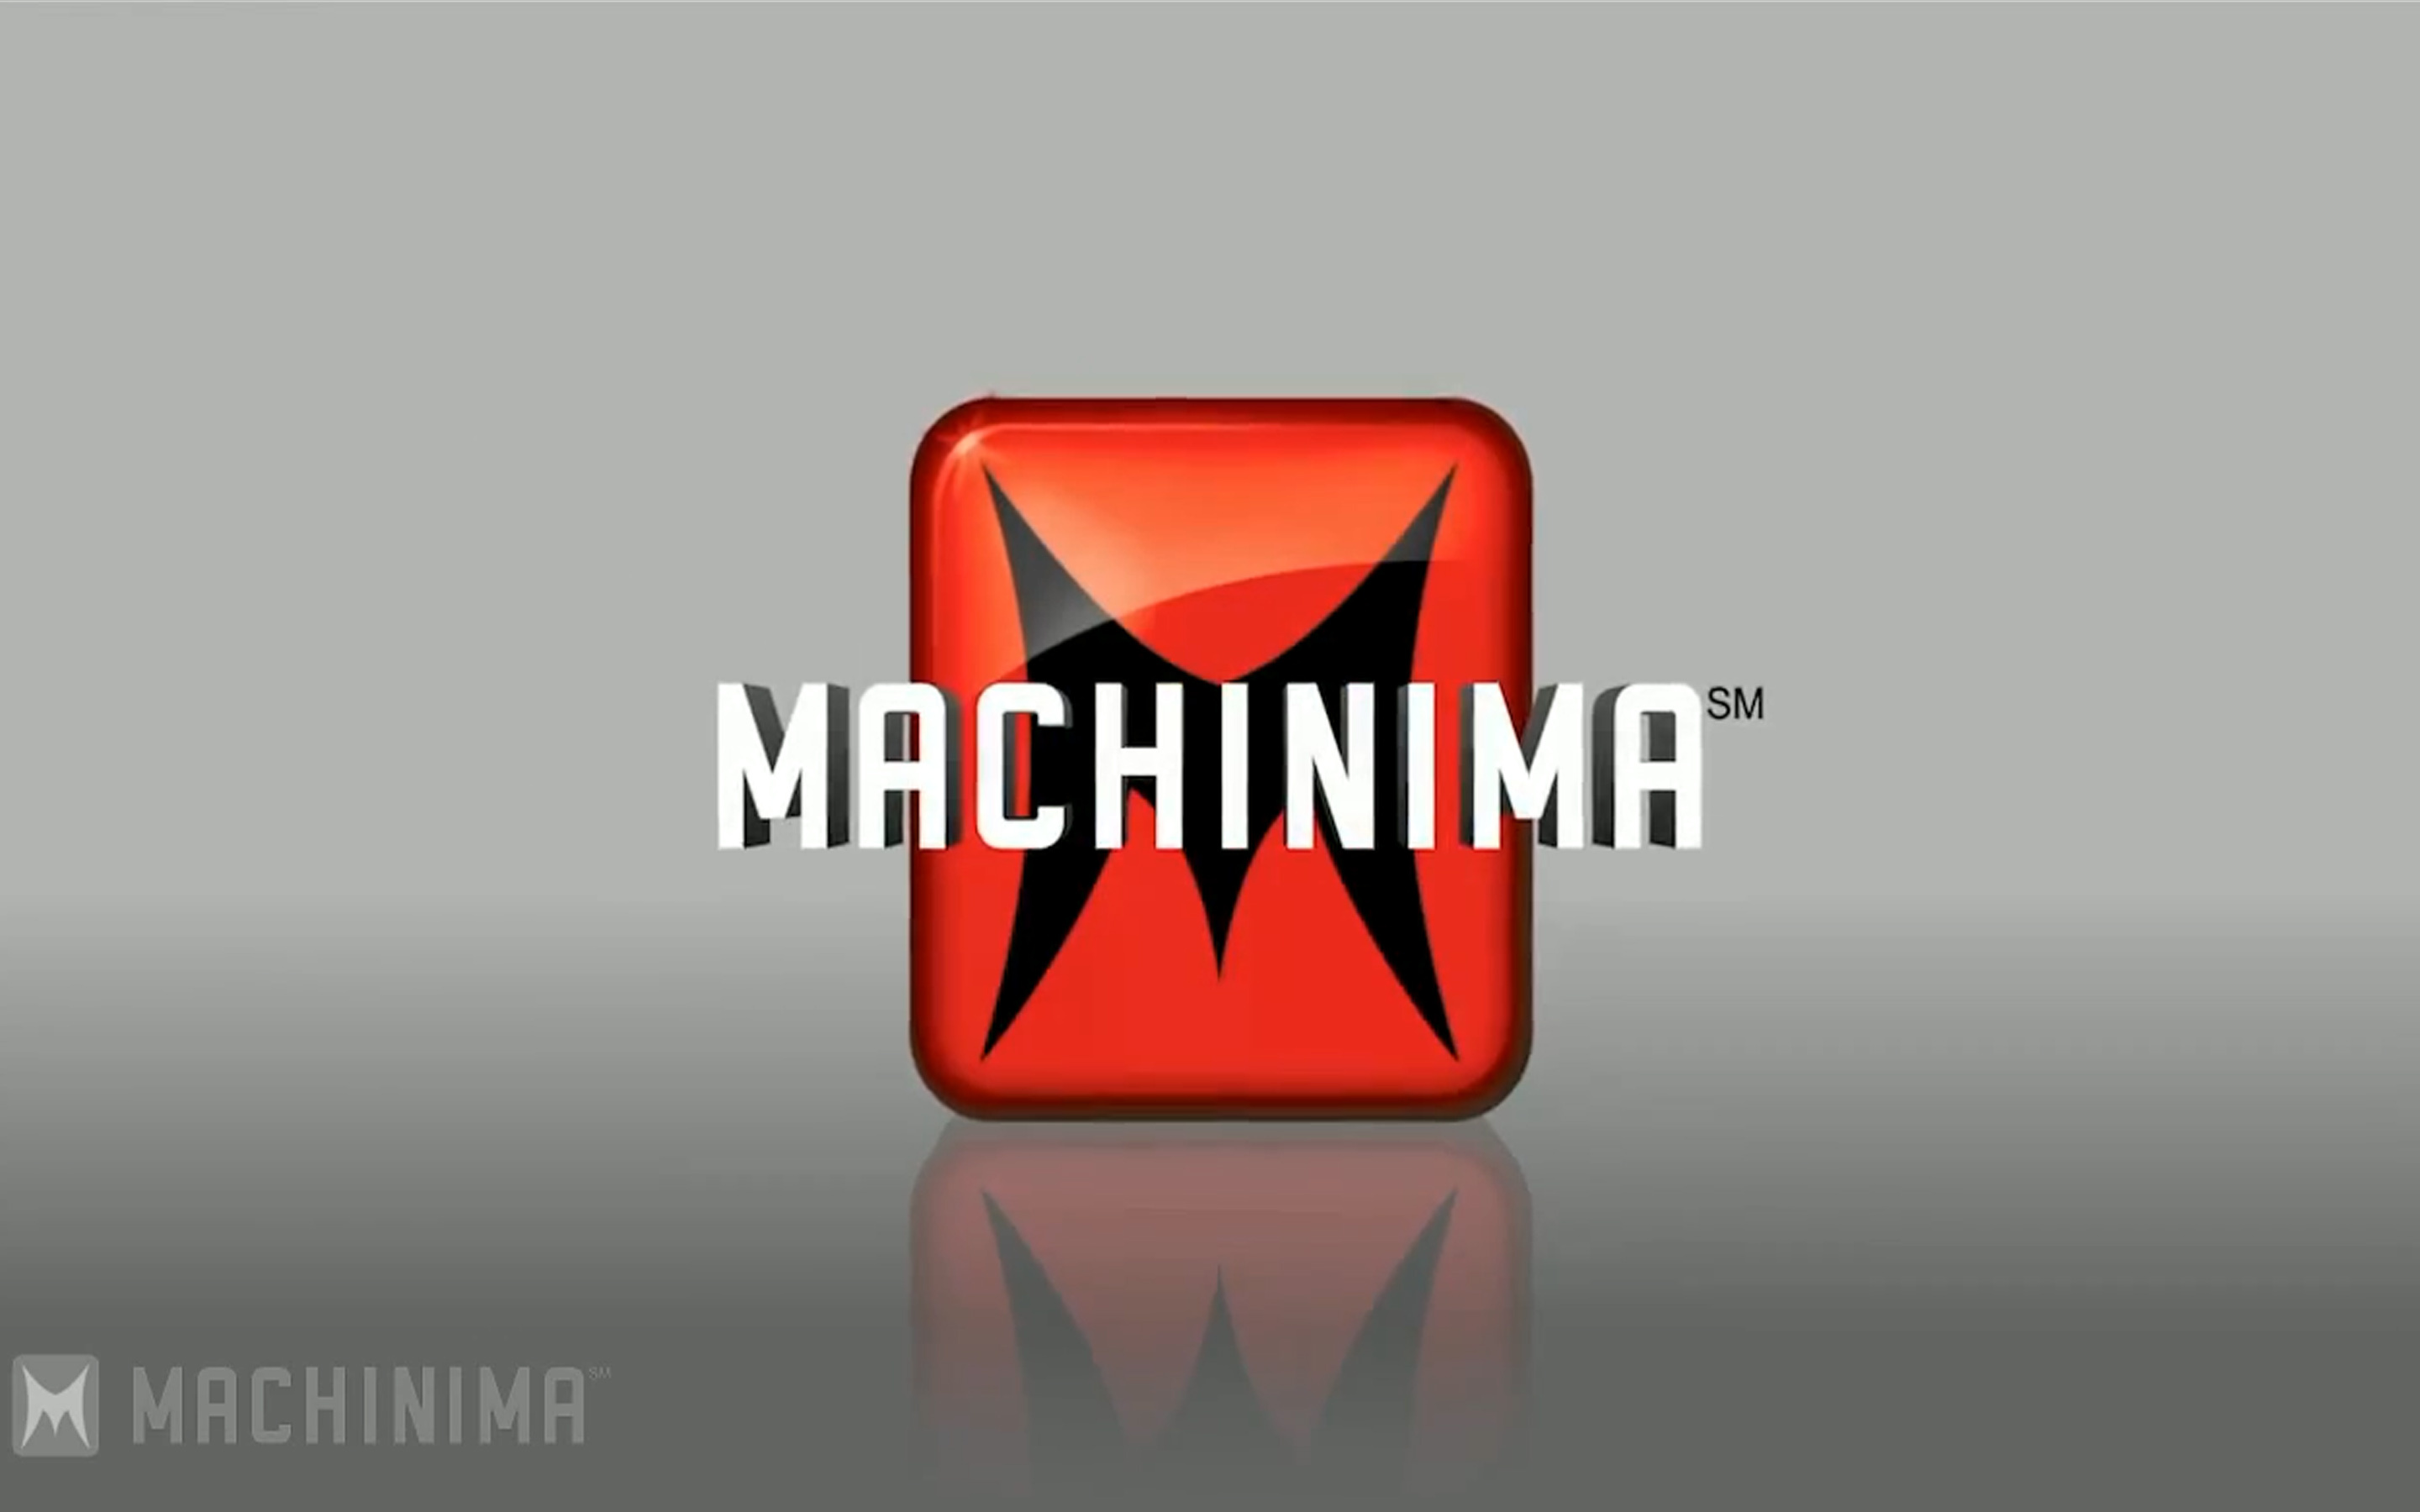 Geek insider, geekinsider, geekinsider. Com,, machinima: true video game movies, gaming